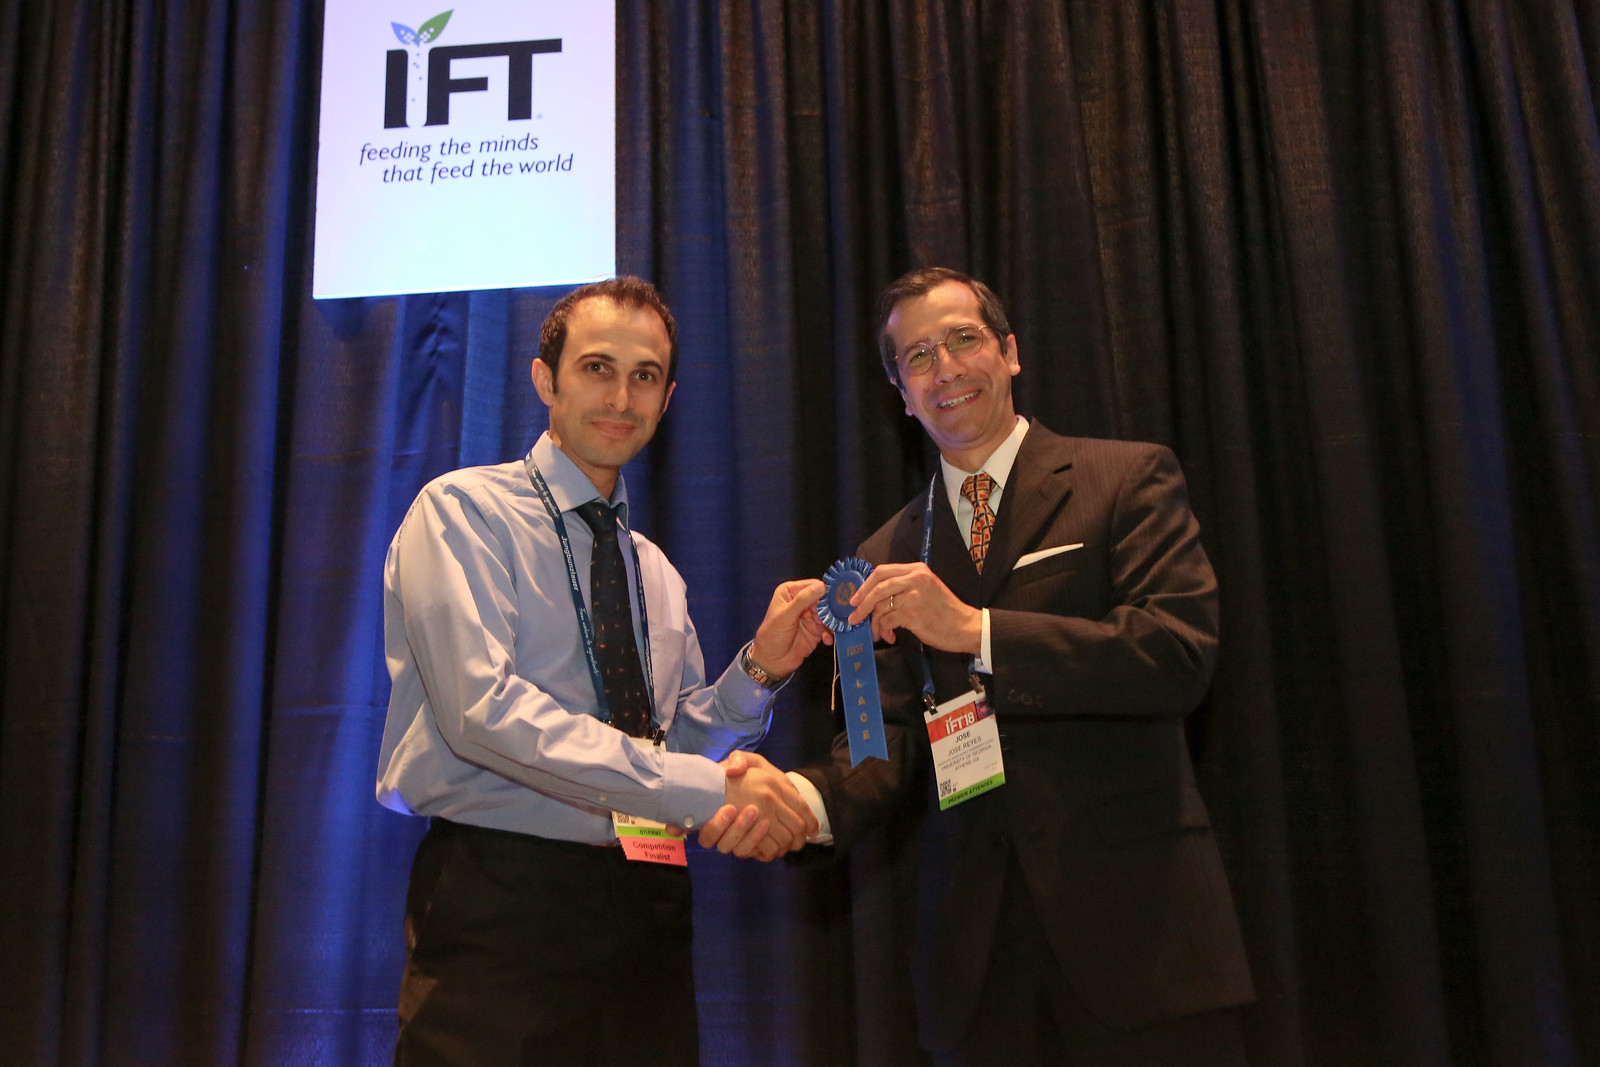 Ali while receiving the 1st place at IFT18 Student Research Paper Poster Competition.